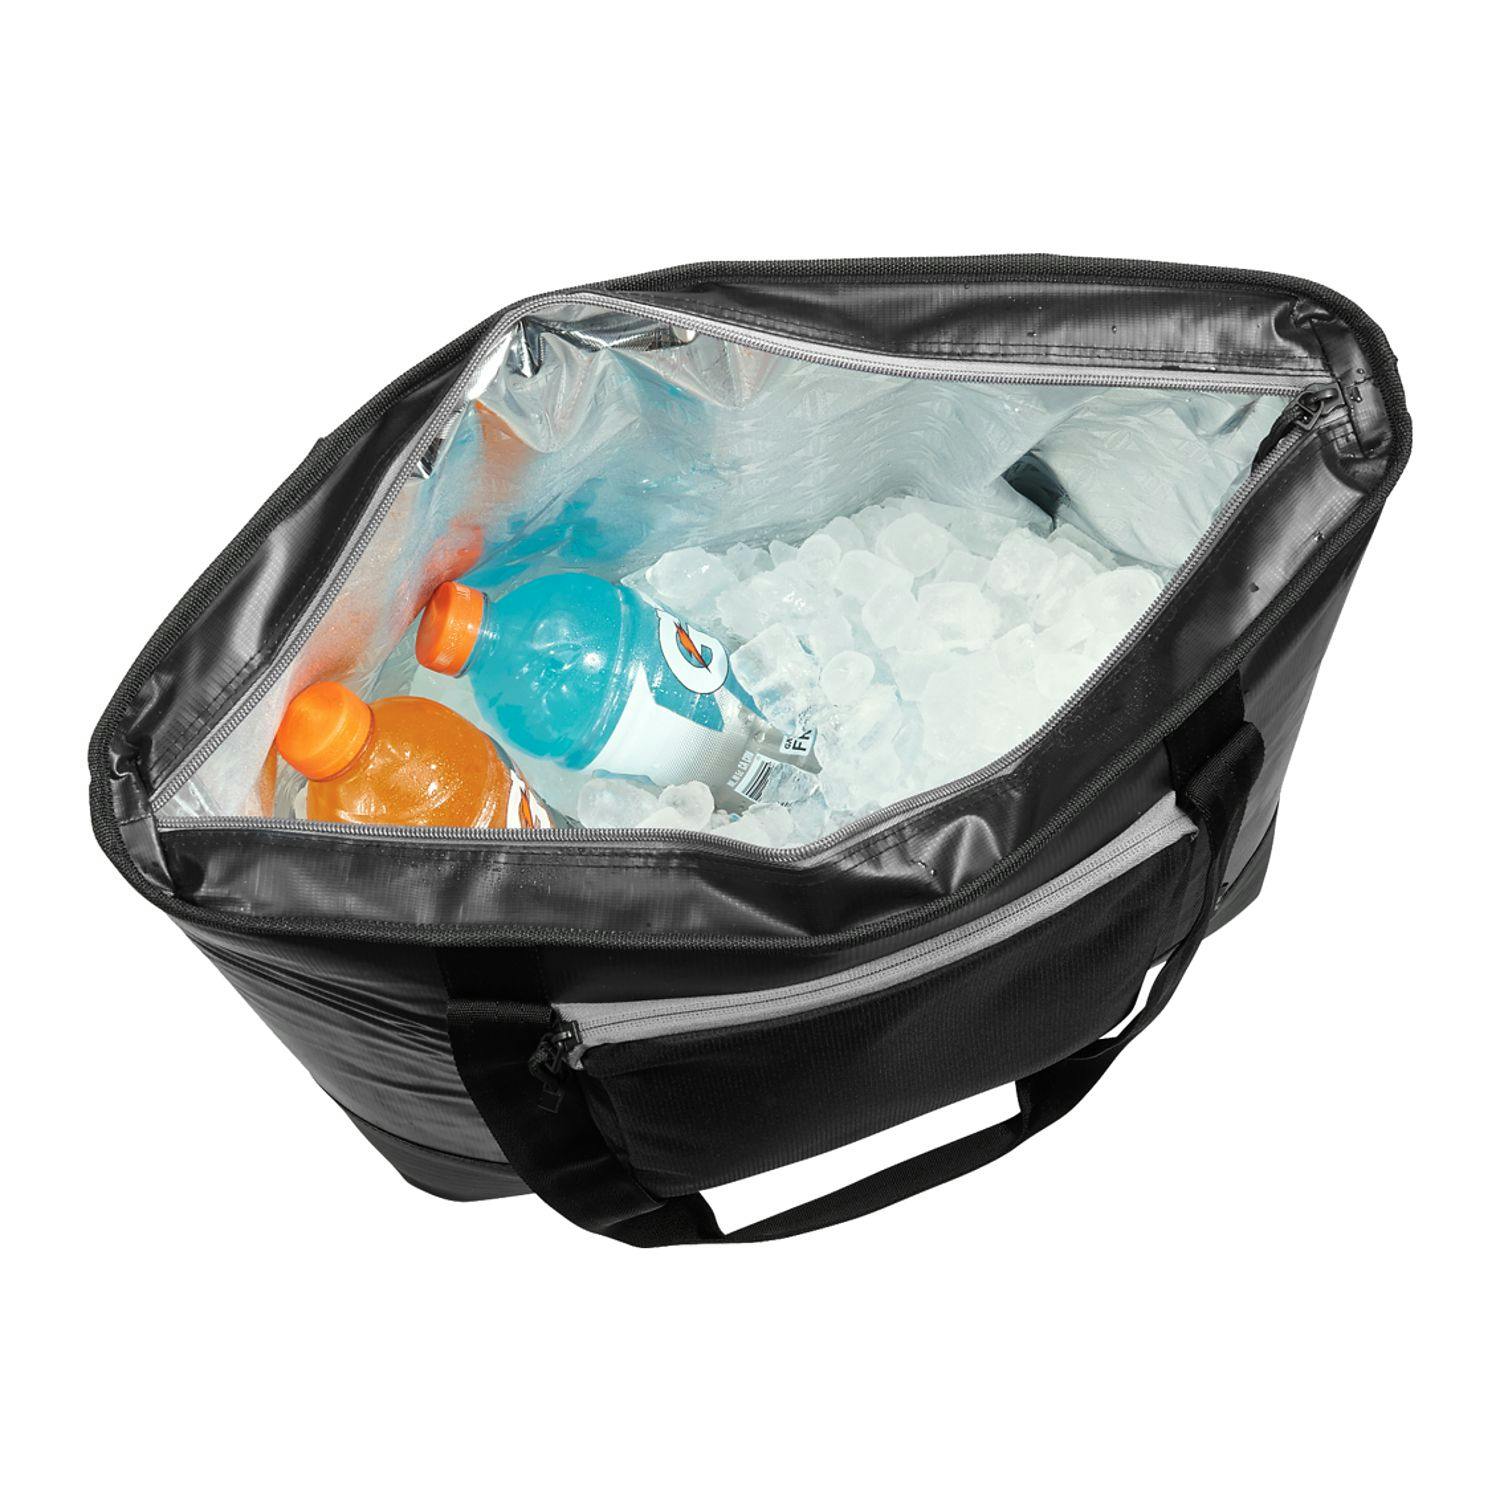 Arctic Zone® Titan Deep Freeze® 3 Day Ice Cooler - additional Image 3